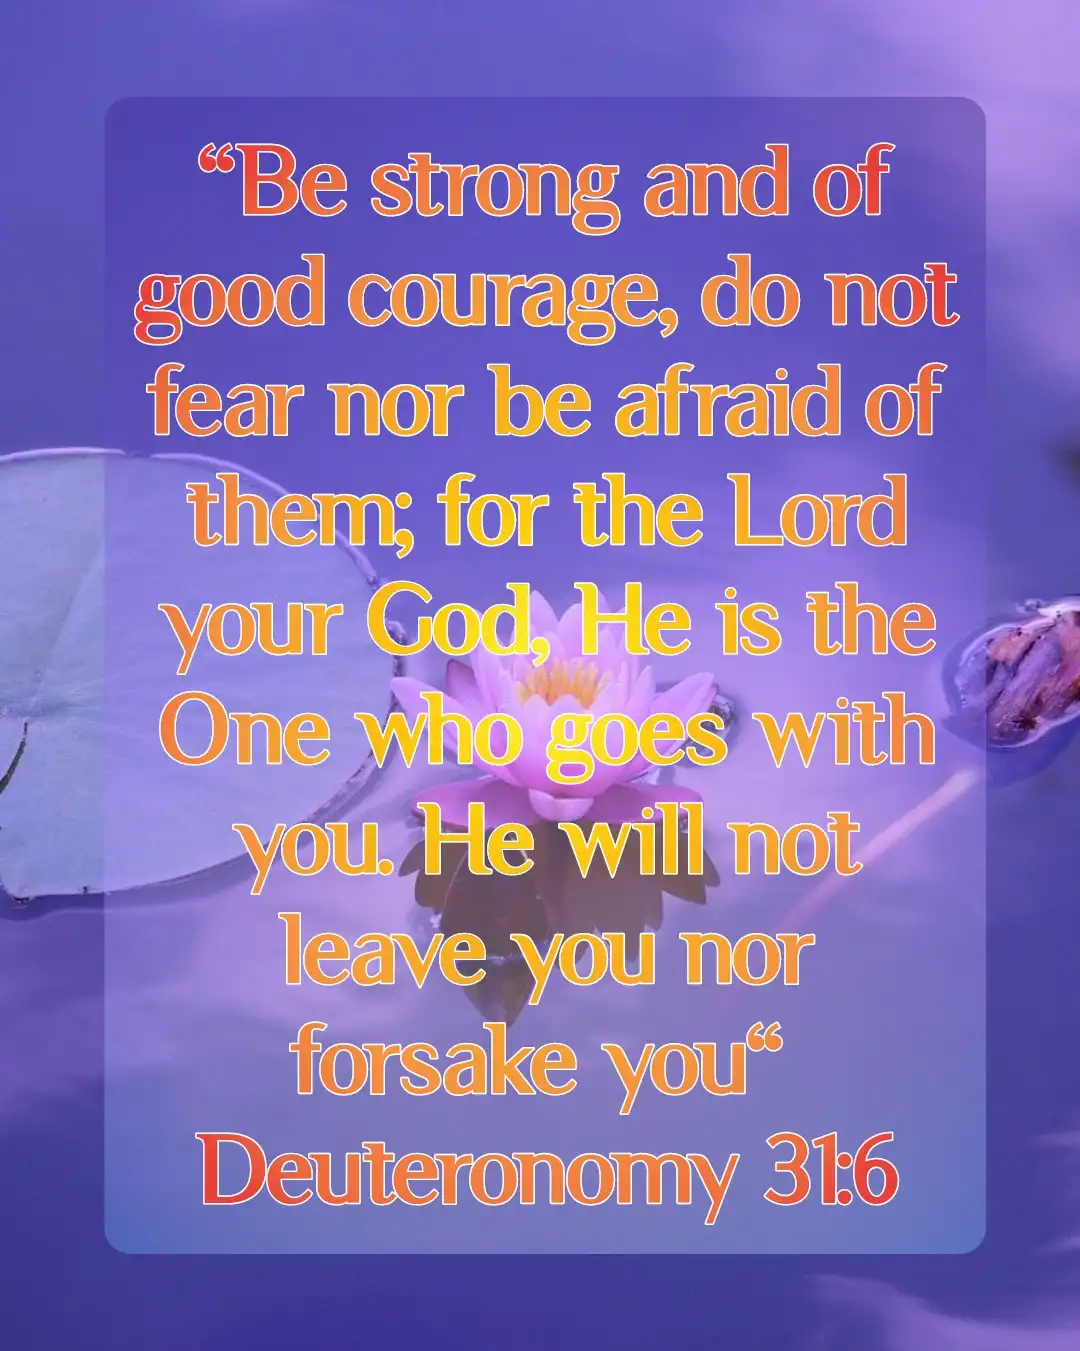 Bible Verses God Is With You(Deuteronomy 31:6)